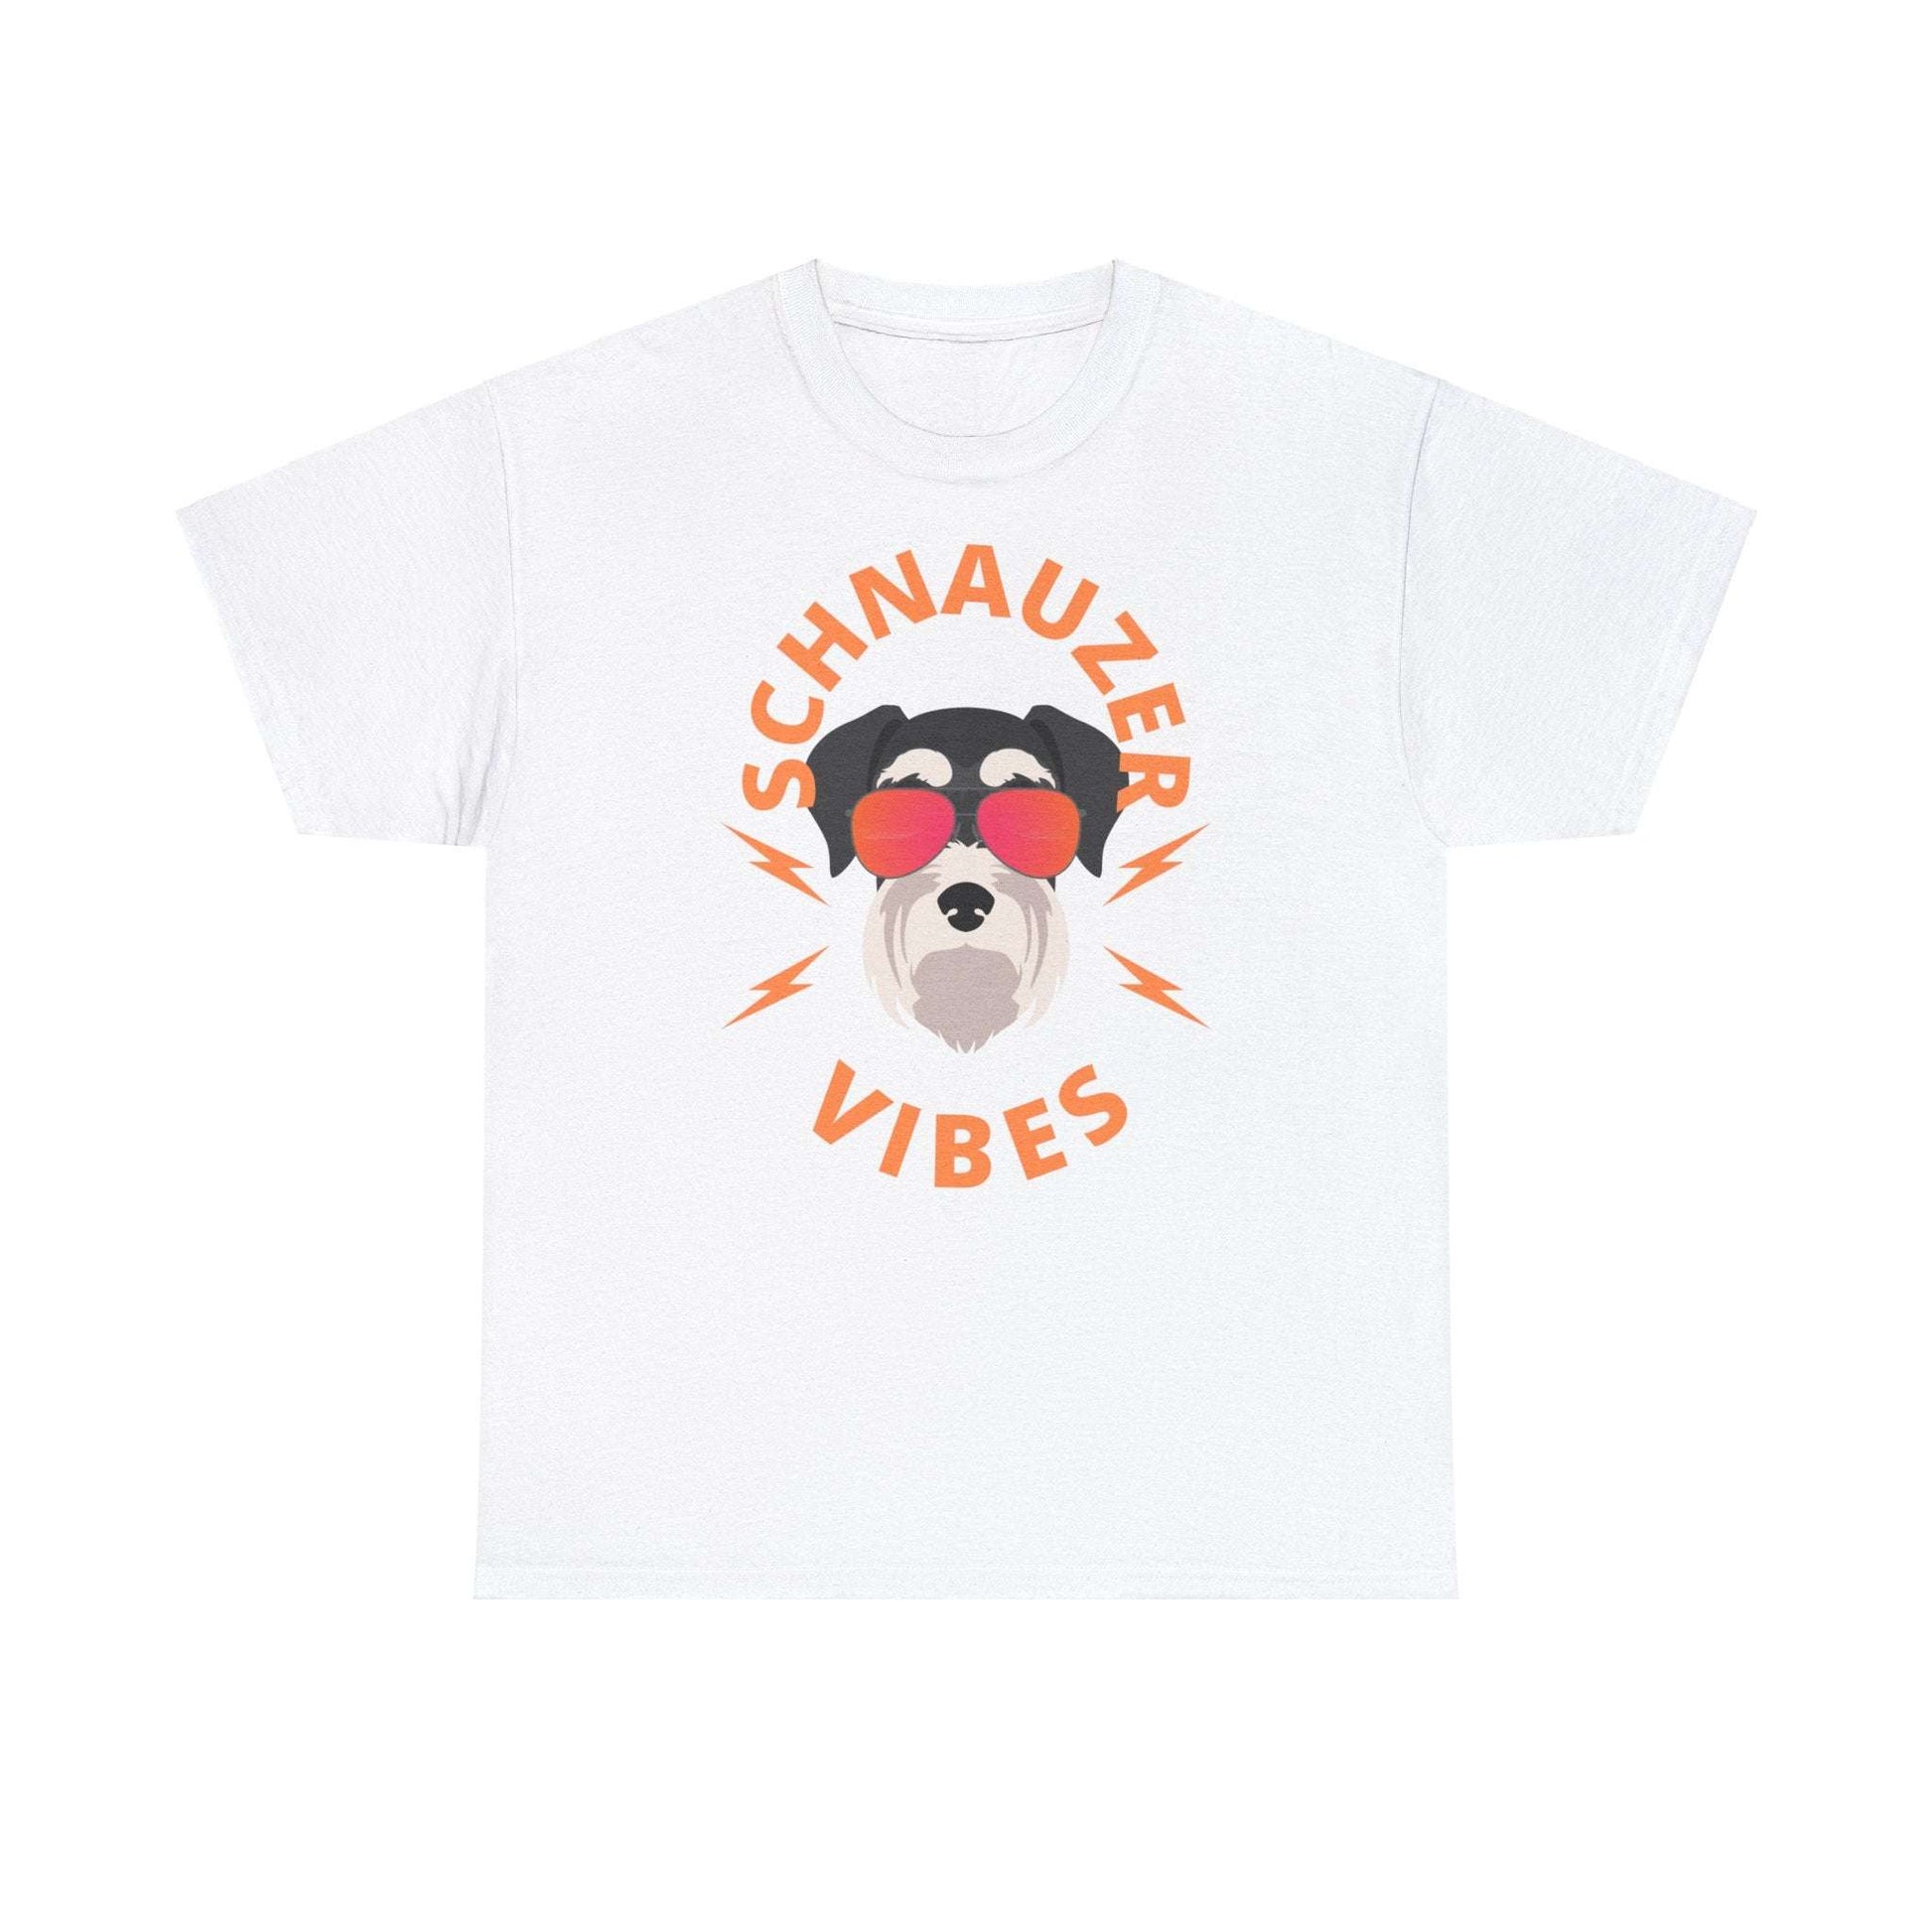 Fabulous Tee Shirts' white 'Schnauzer Vibes' t-shirt displayed to emphasize its superior quality.